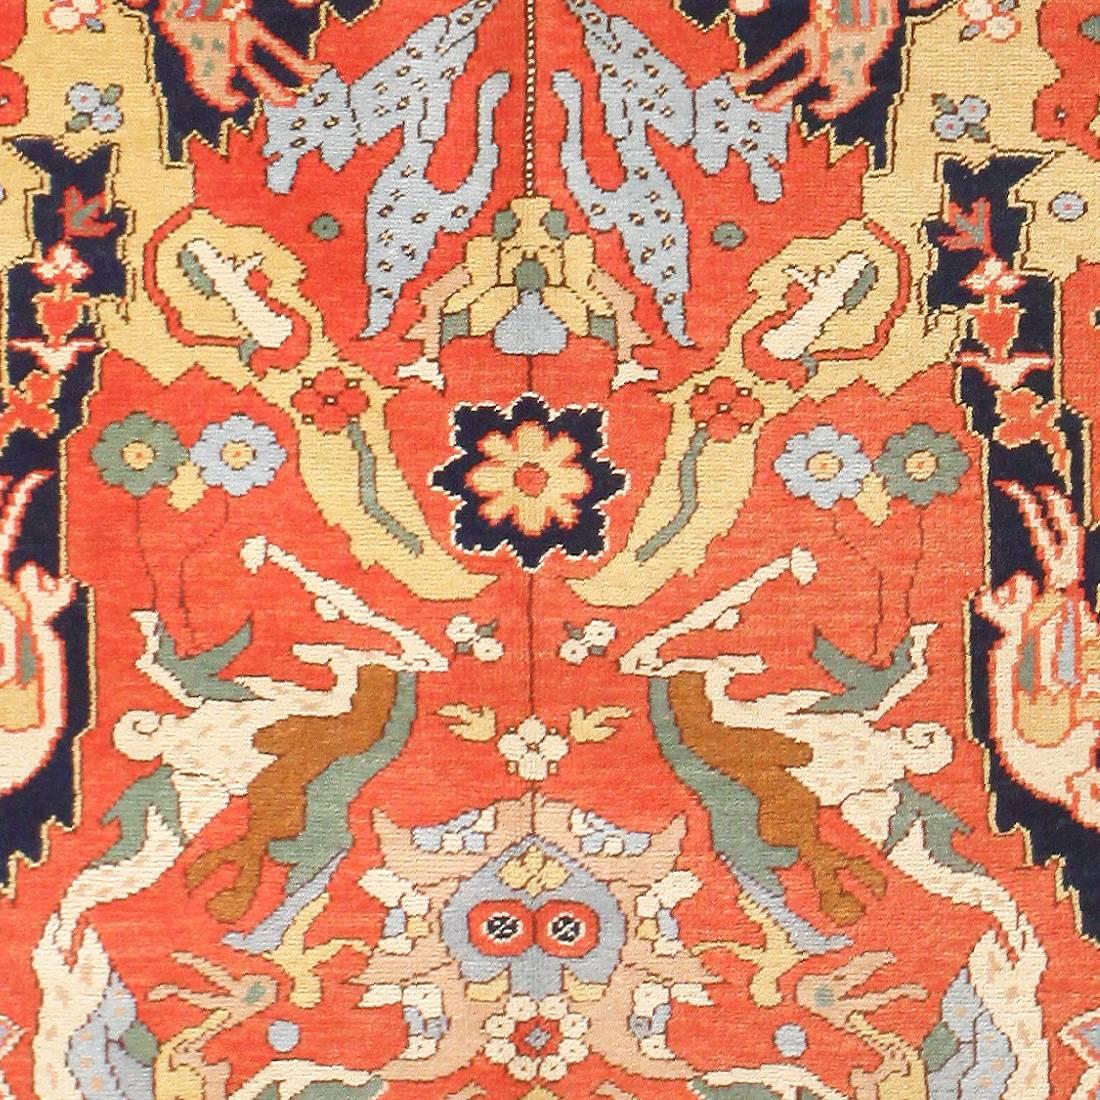 Antique Tuduc rugs, Born in Transylvania, Theodor Tuduc (1888-1983) was a Romanian rug restorer and famous rug forger. He made high quality, exact reproductions of antique rugs and passed them off as authentic. His technical skills were so refined